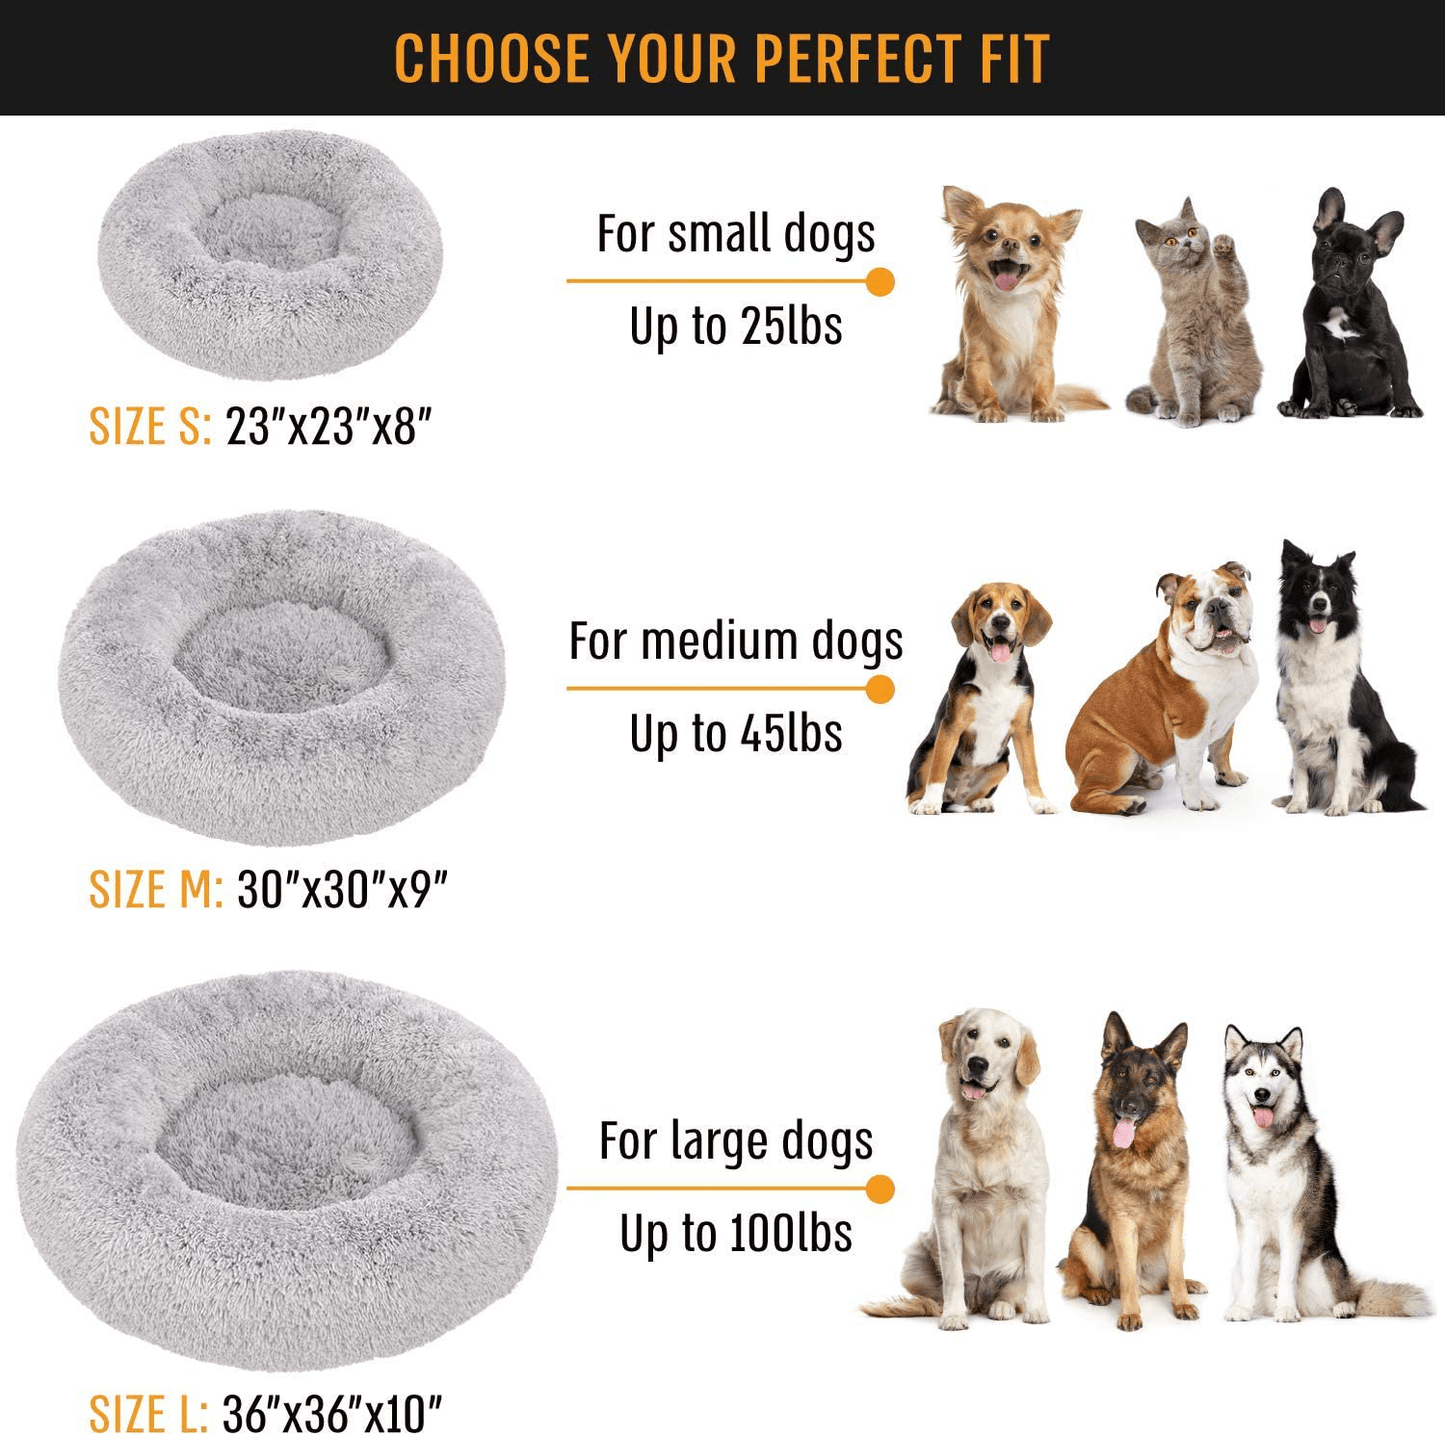 Active Pets Plush Calming Dog Bed, Donut Dog Bed for Small Dogs, Medium & Large, anti Anxiety Dog Bed, Soft Fuzzy Calming Bed for Dogs & Cats, Comfy Cat Bed, Marshmallow Cuddler Nest Calming Pet Bed Animals & Pet Supplies > Pet Supplies > Cat Supplies > Cat Beds Active Pets   